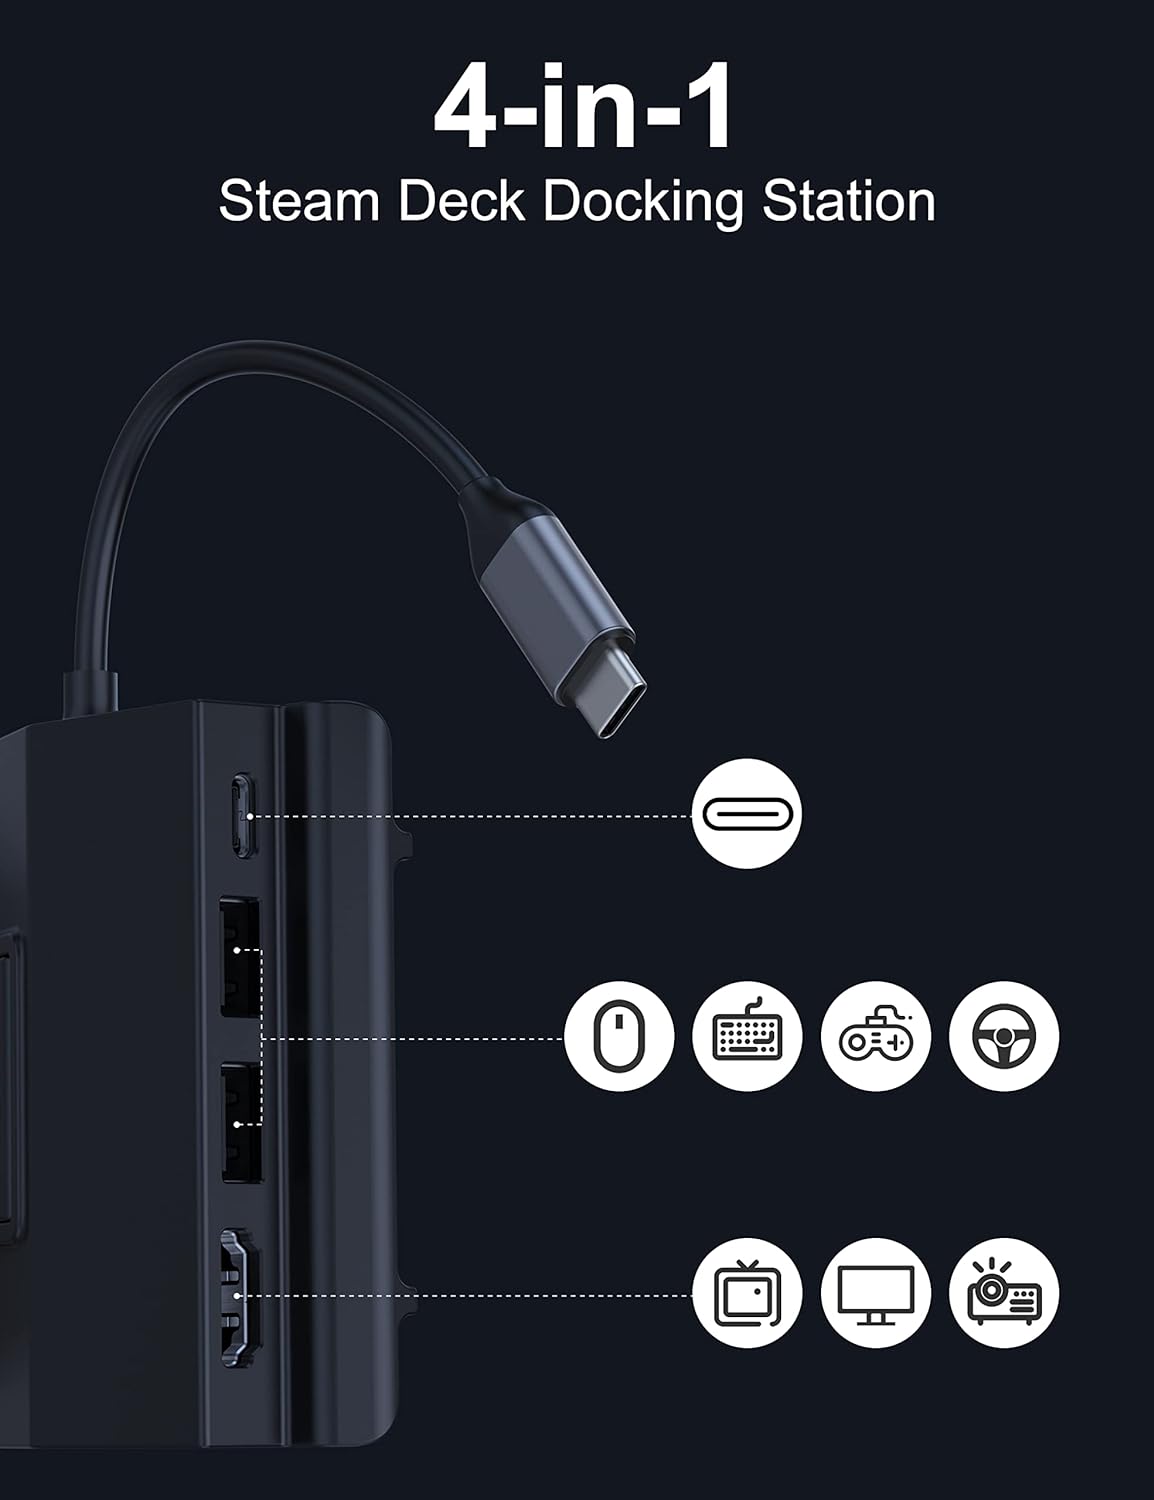 Portable Steam Deck Dock, 4-in-1 Steam Deck Docking Station with HDMI 2.0 4K@60Hz, 2 USB-A 2.0 for Keyboard, Mouse and Handle, PD in 100W Max, Steam Deck Stand Base Gadget, Steam Deck Accessories